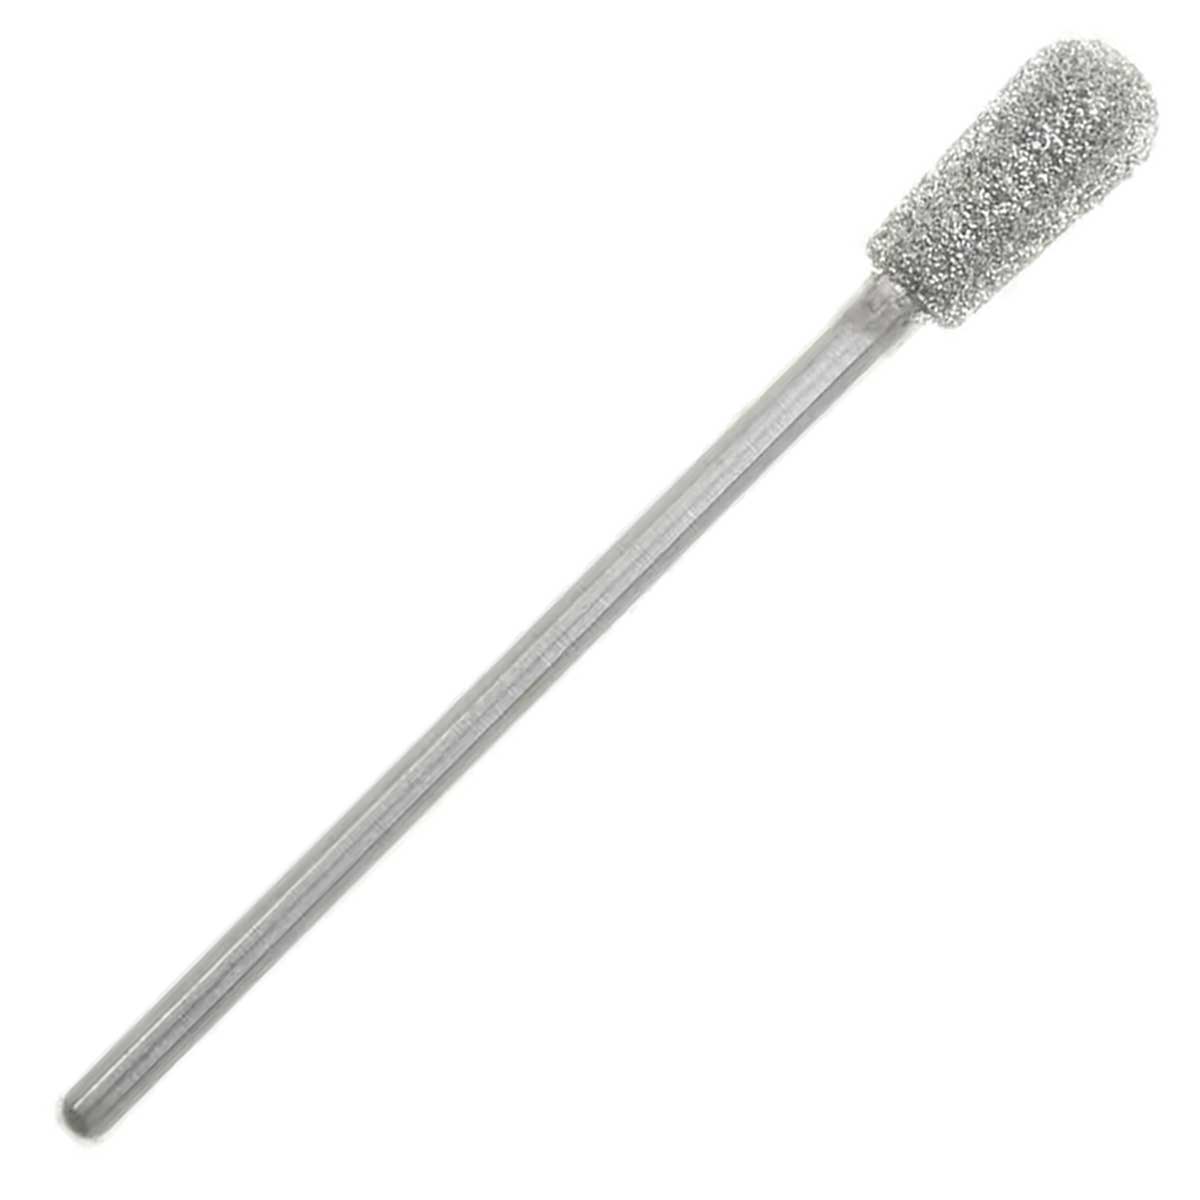 04.6 x 8.7mm Round End Inverted Cone Diamond burr - 150 Grit - 3/32 inch shank